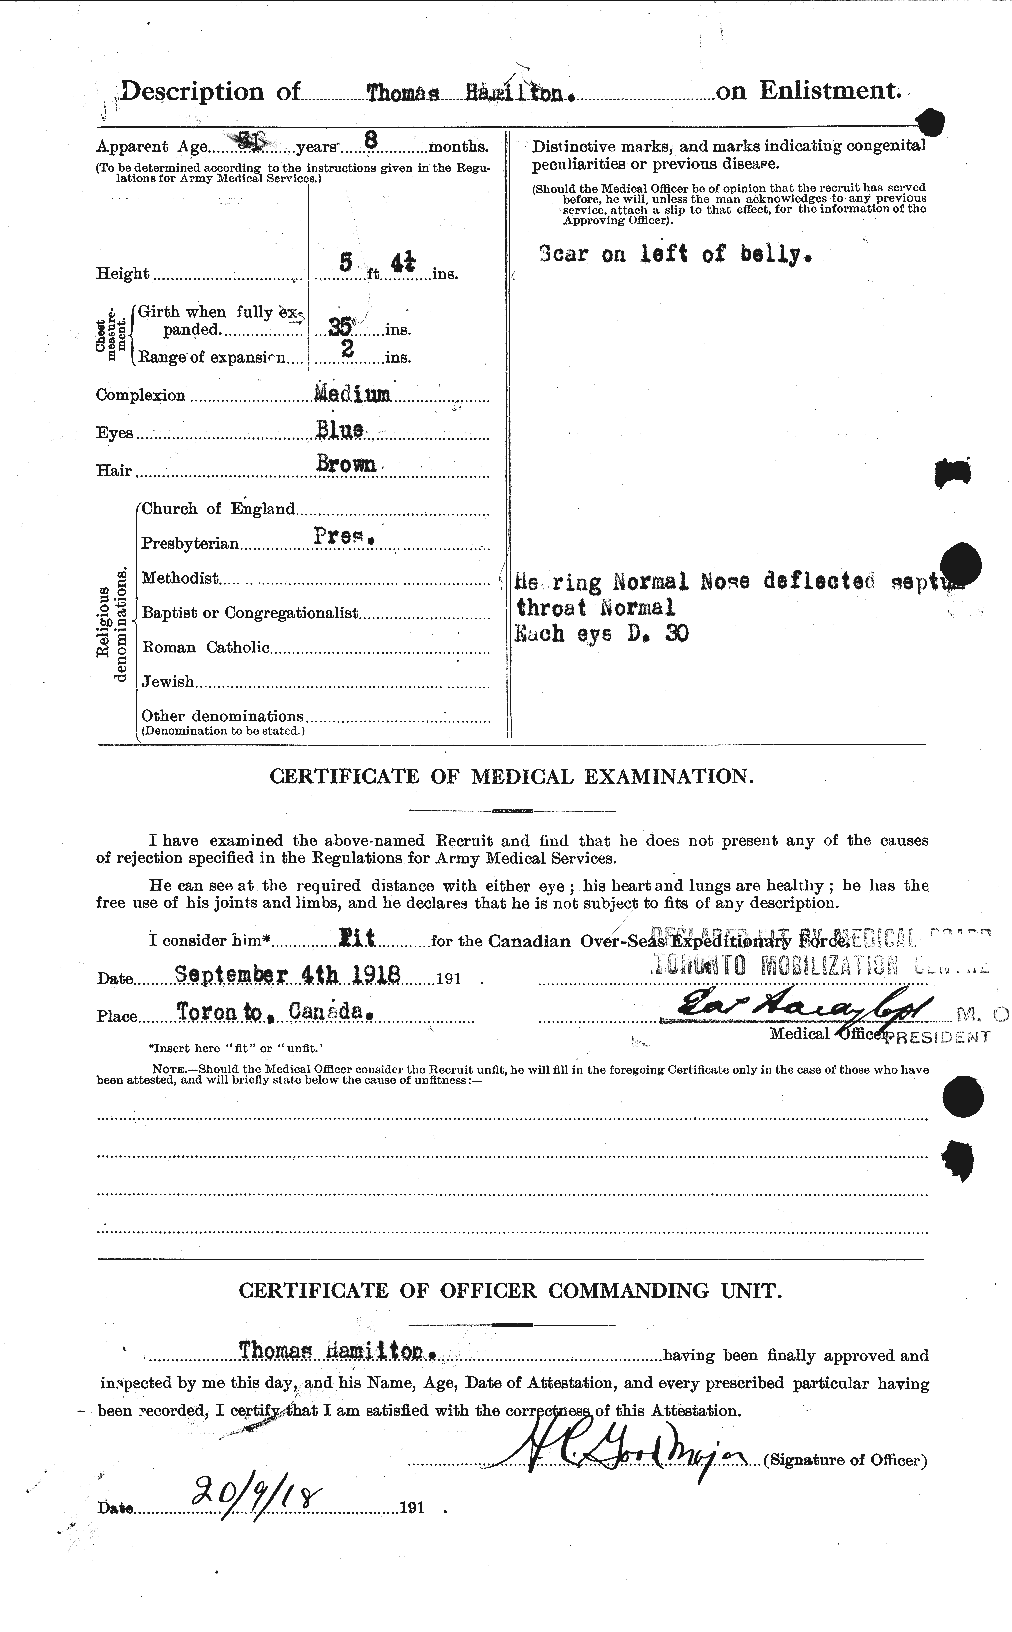 Personnel Records of the First World War - CEF 373334b